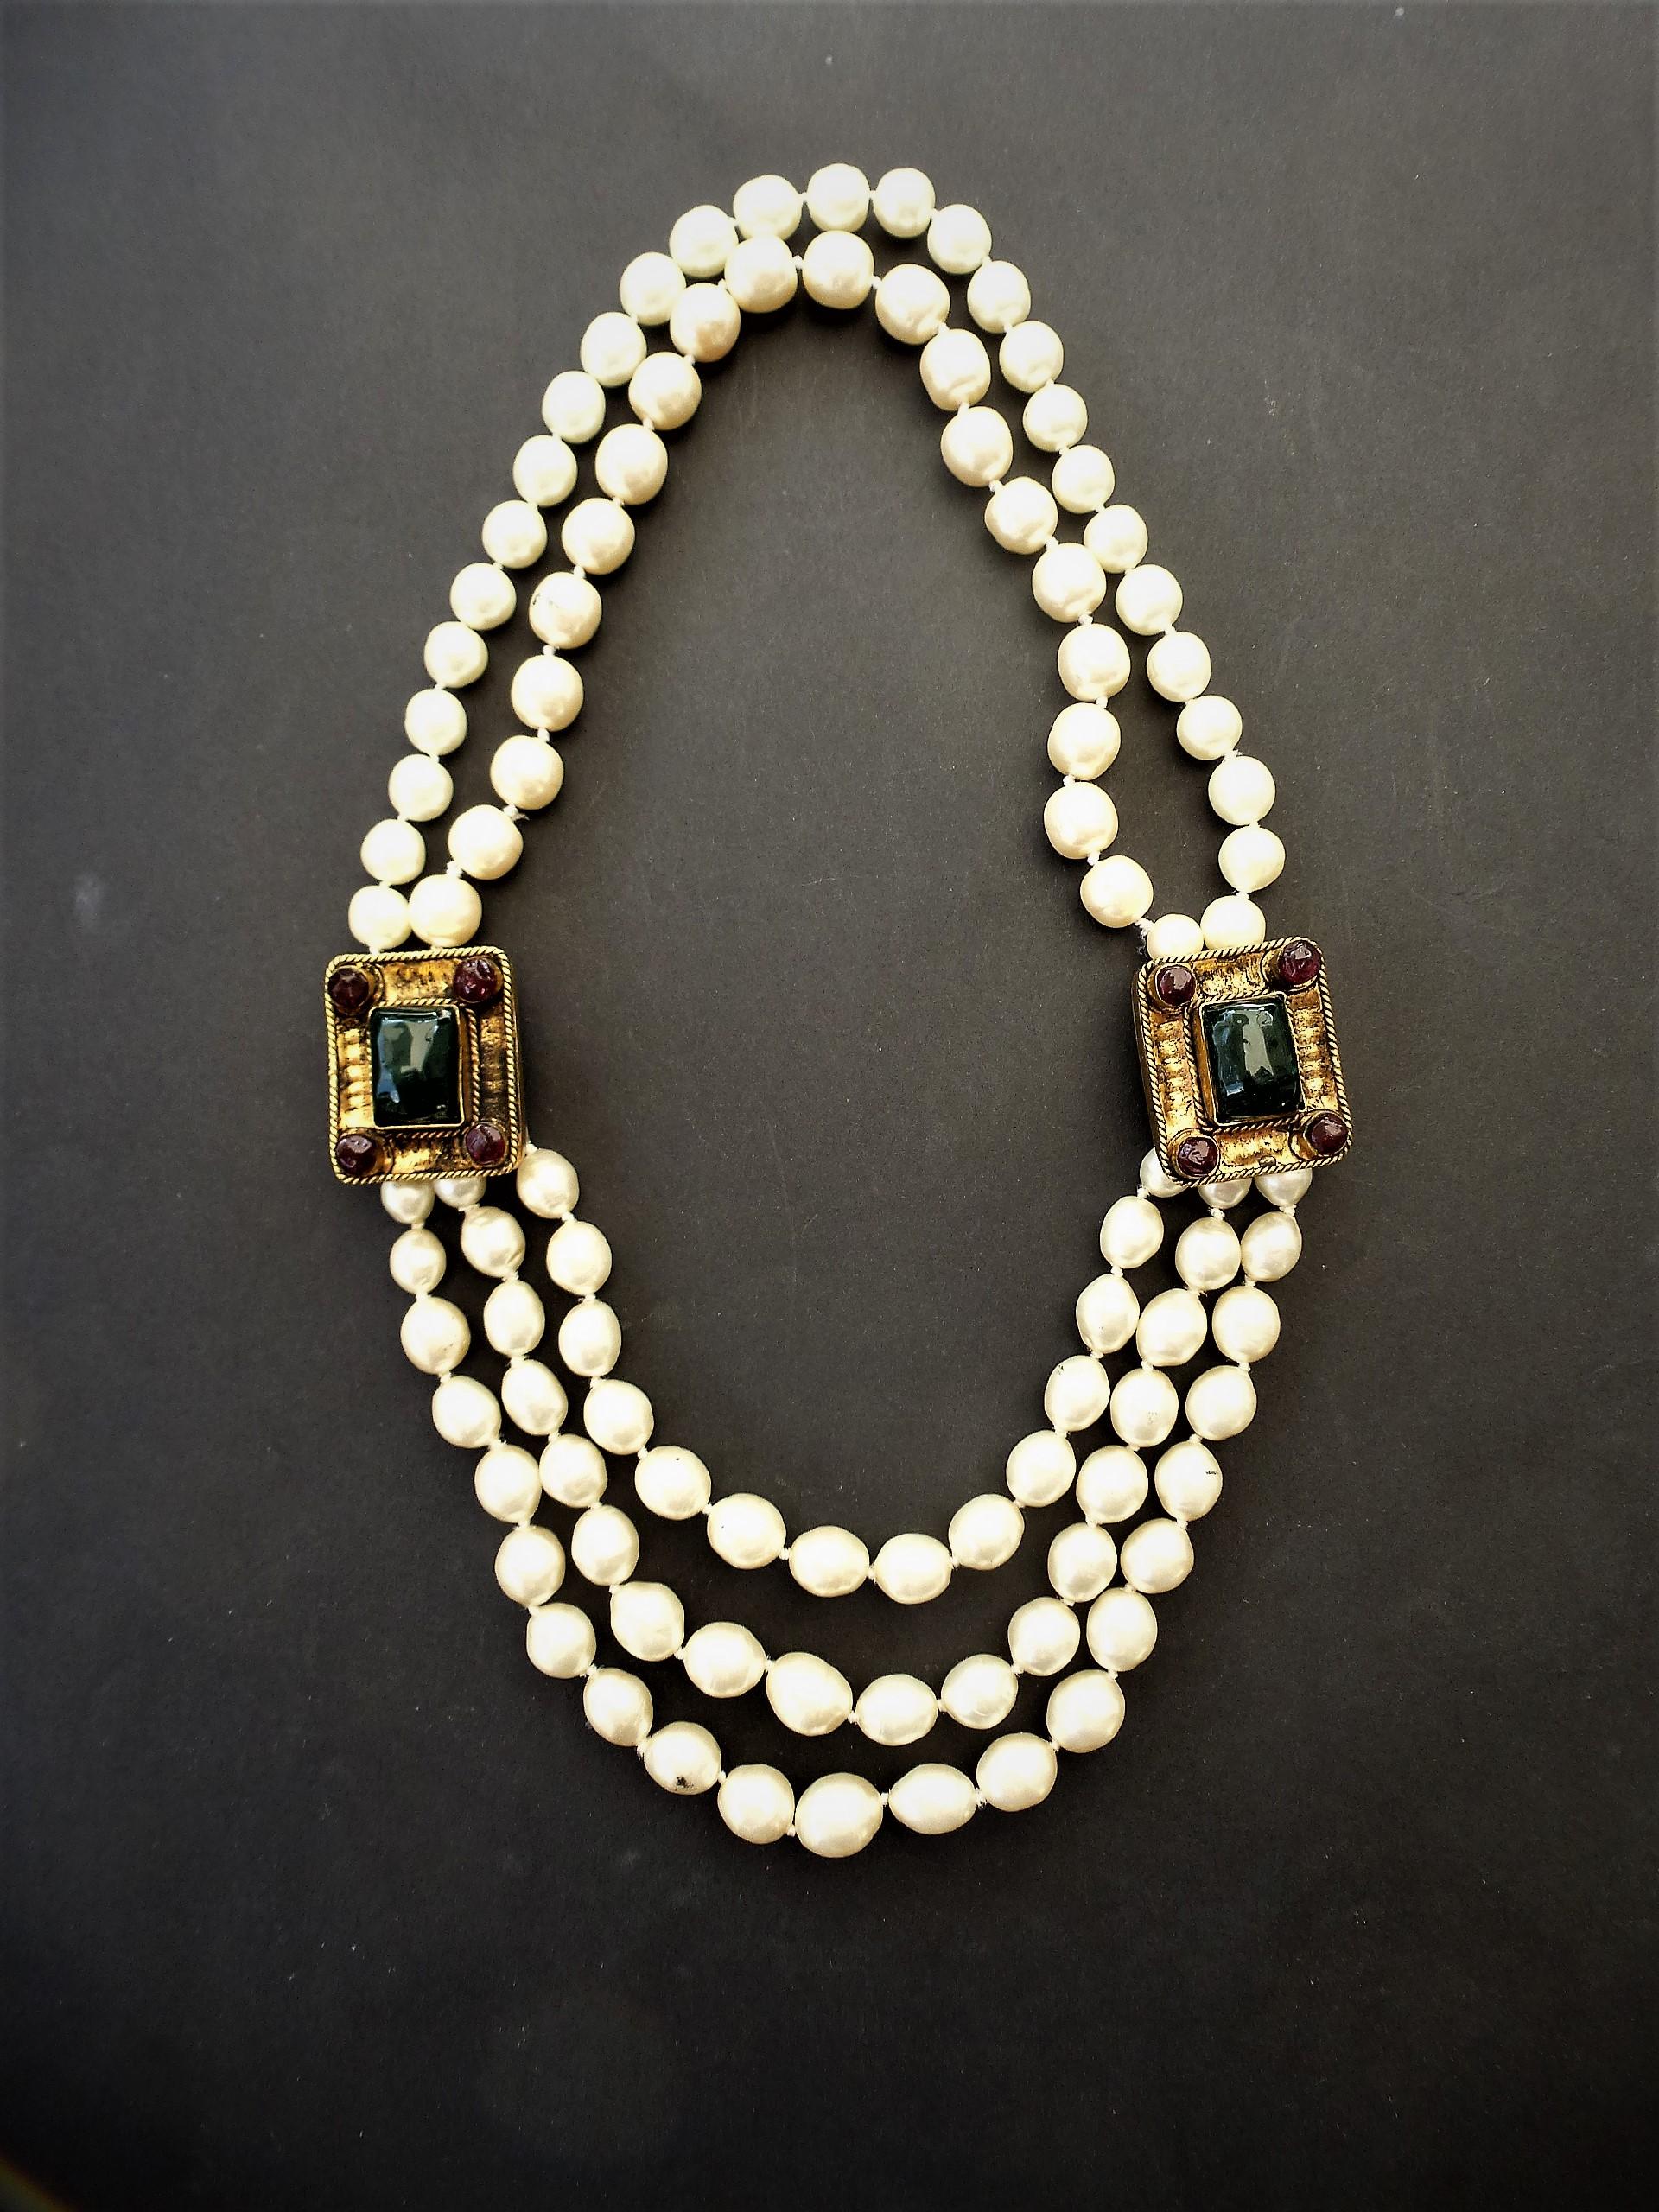 Artisan Vintage Chanel pearl necklace by R. Goossens and House of Gripoix signed 1984.